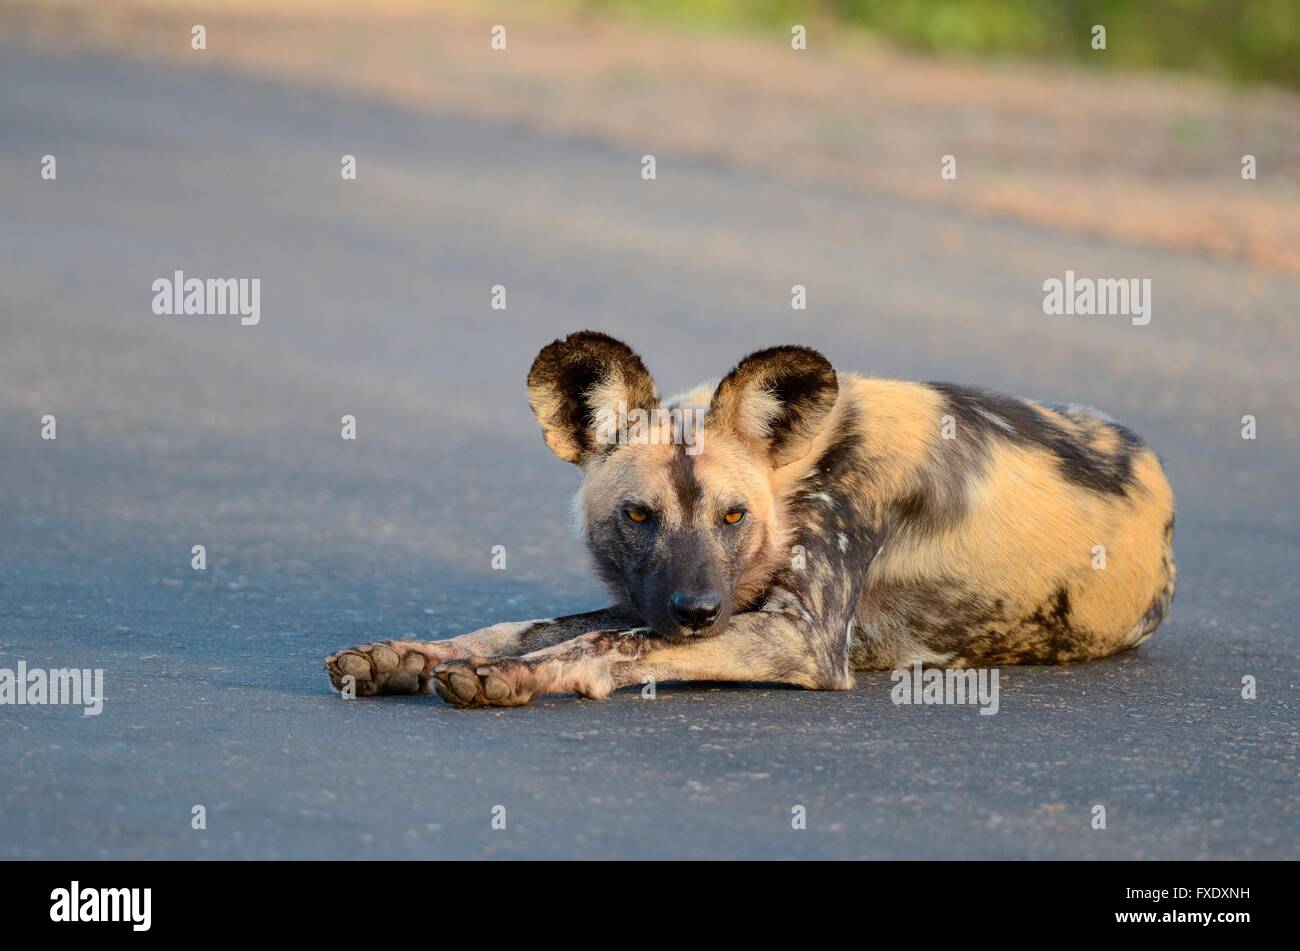 African Wild Dog, African Hunting Dog or African Painted Dog (Lycaon pictus), lying on a road, alert, Kruger National Park Stock Photo